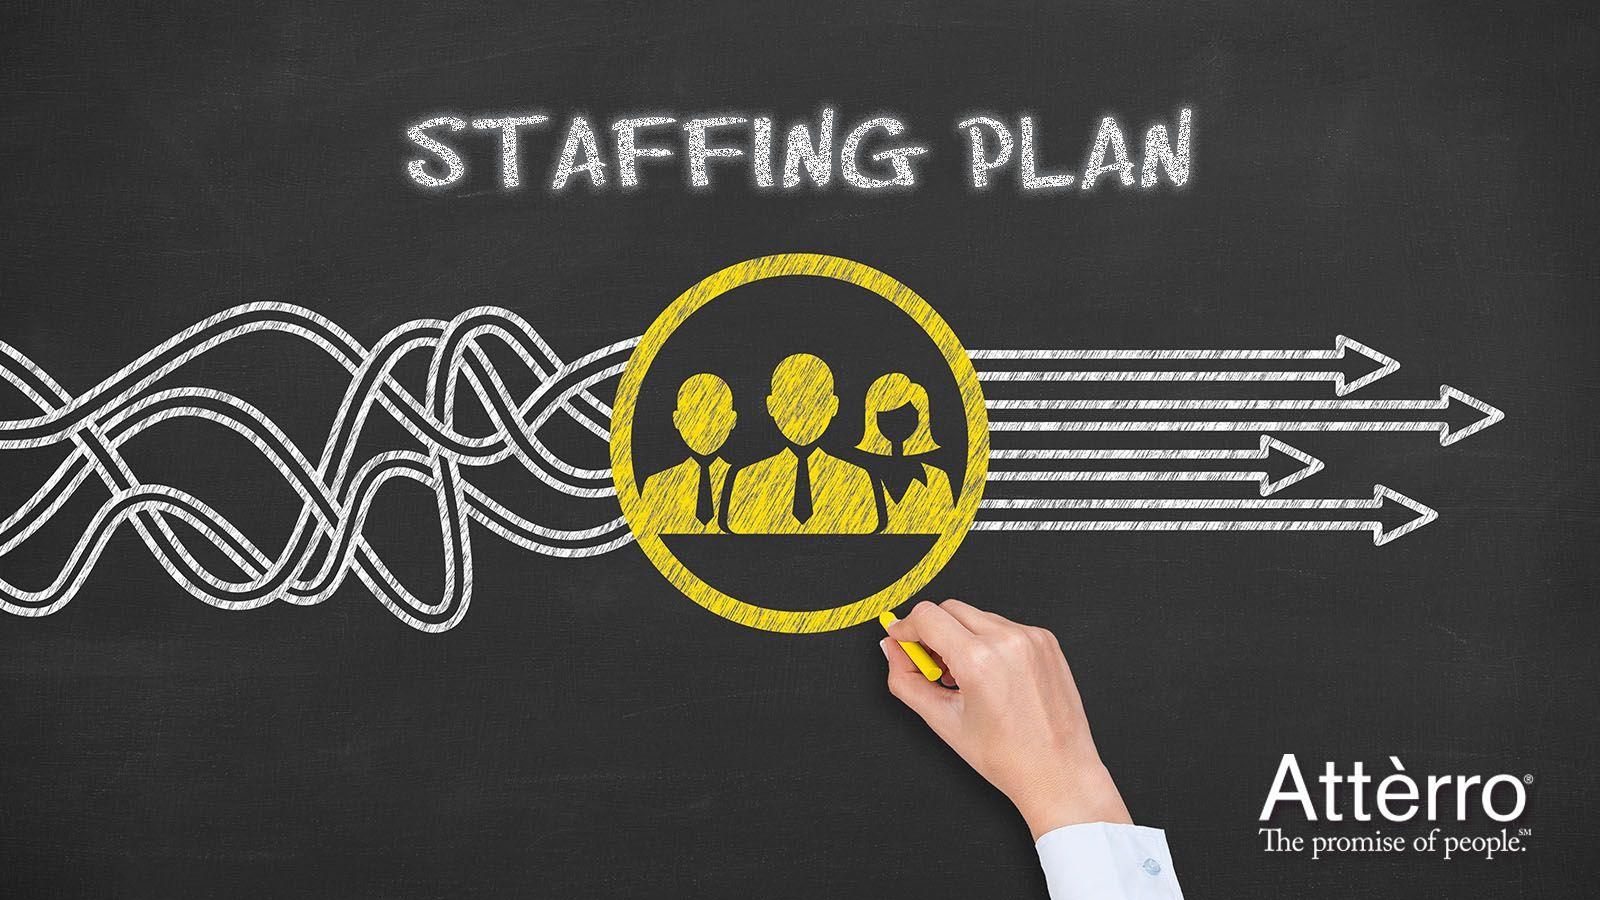 Atterro Logo - Create Your 2019 Staffing Plan in Five Steps